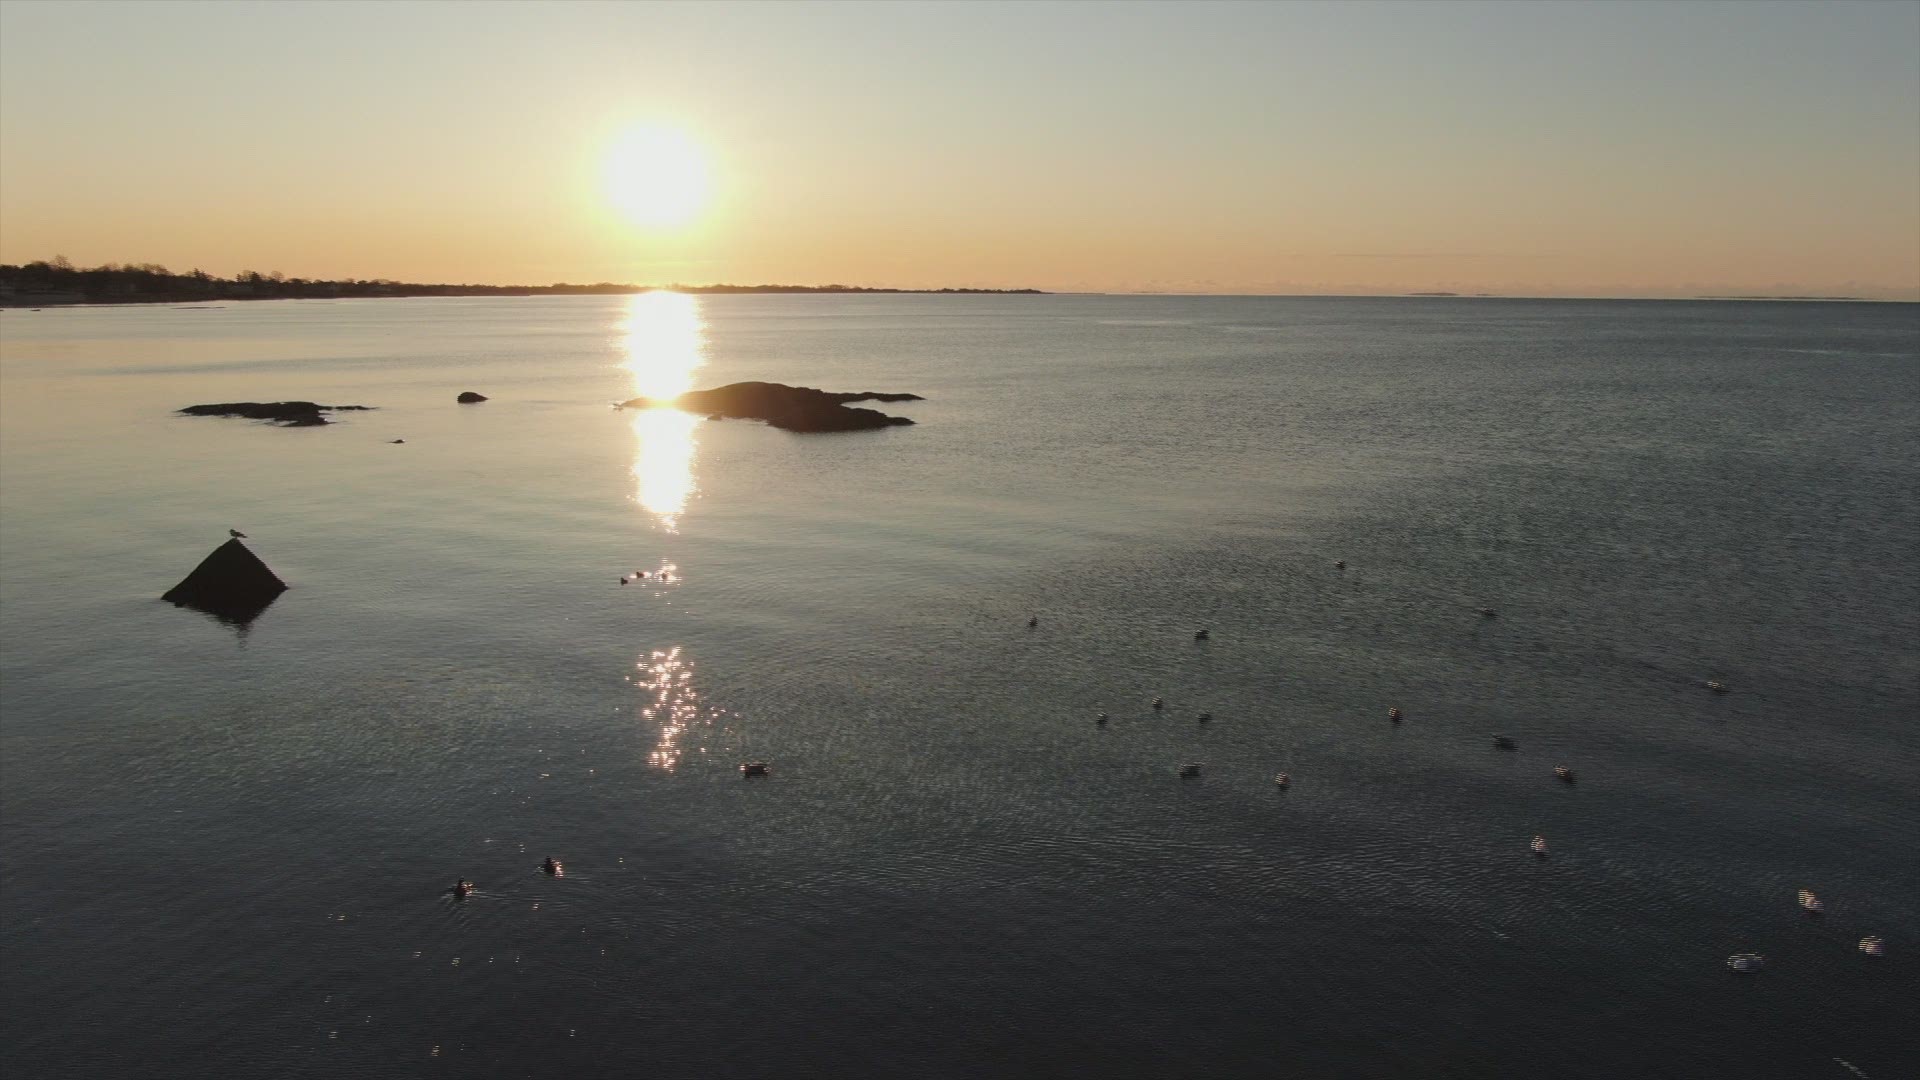 SKY61 was in the skies over East Wharf Beach in Madison! The sun and water look great, but it's still 120 days until summer.